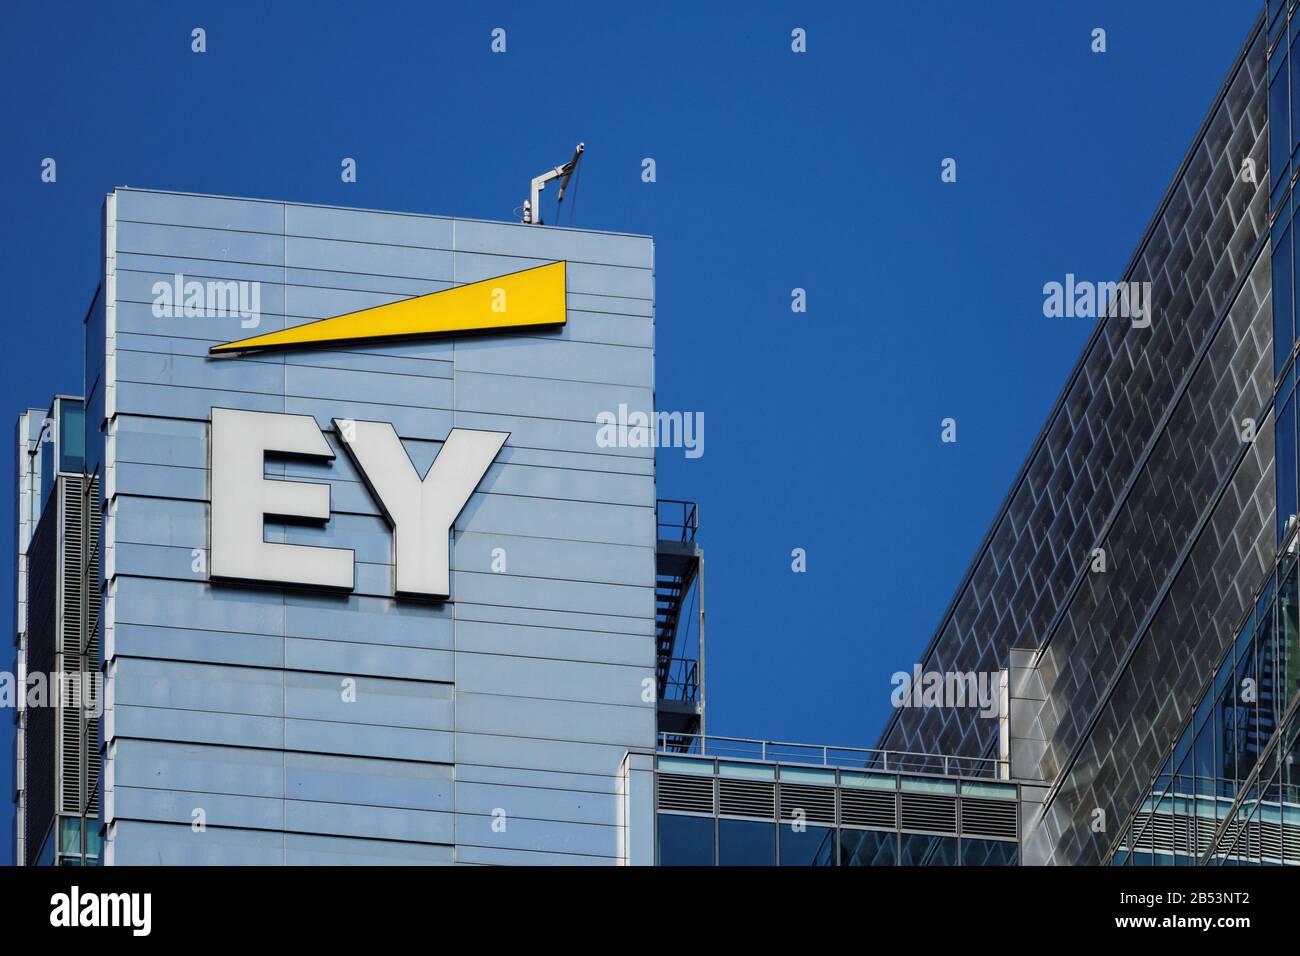 EY (previously Ernst&Young) logotype visible from the street Stock Photo